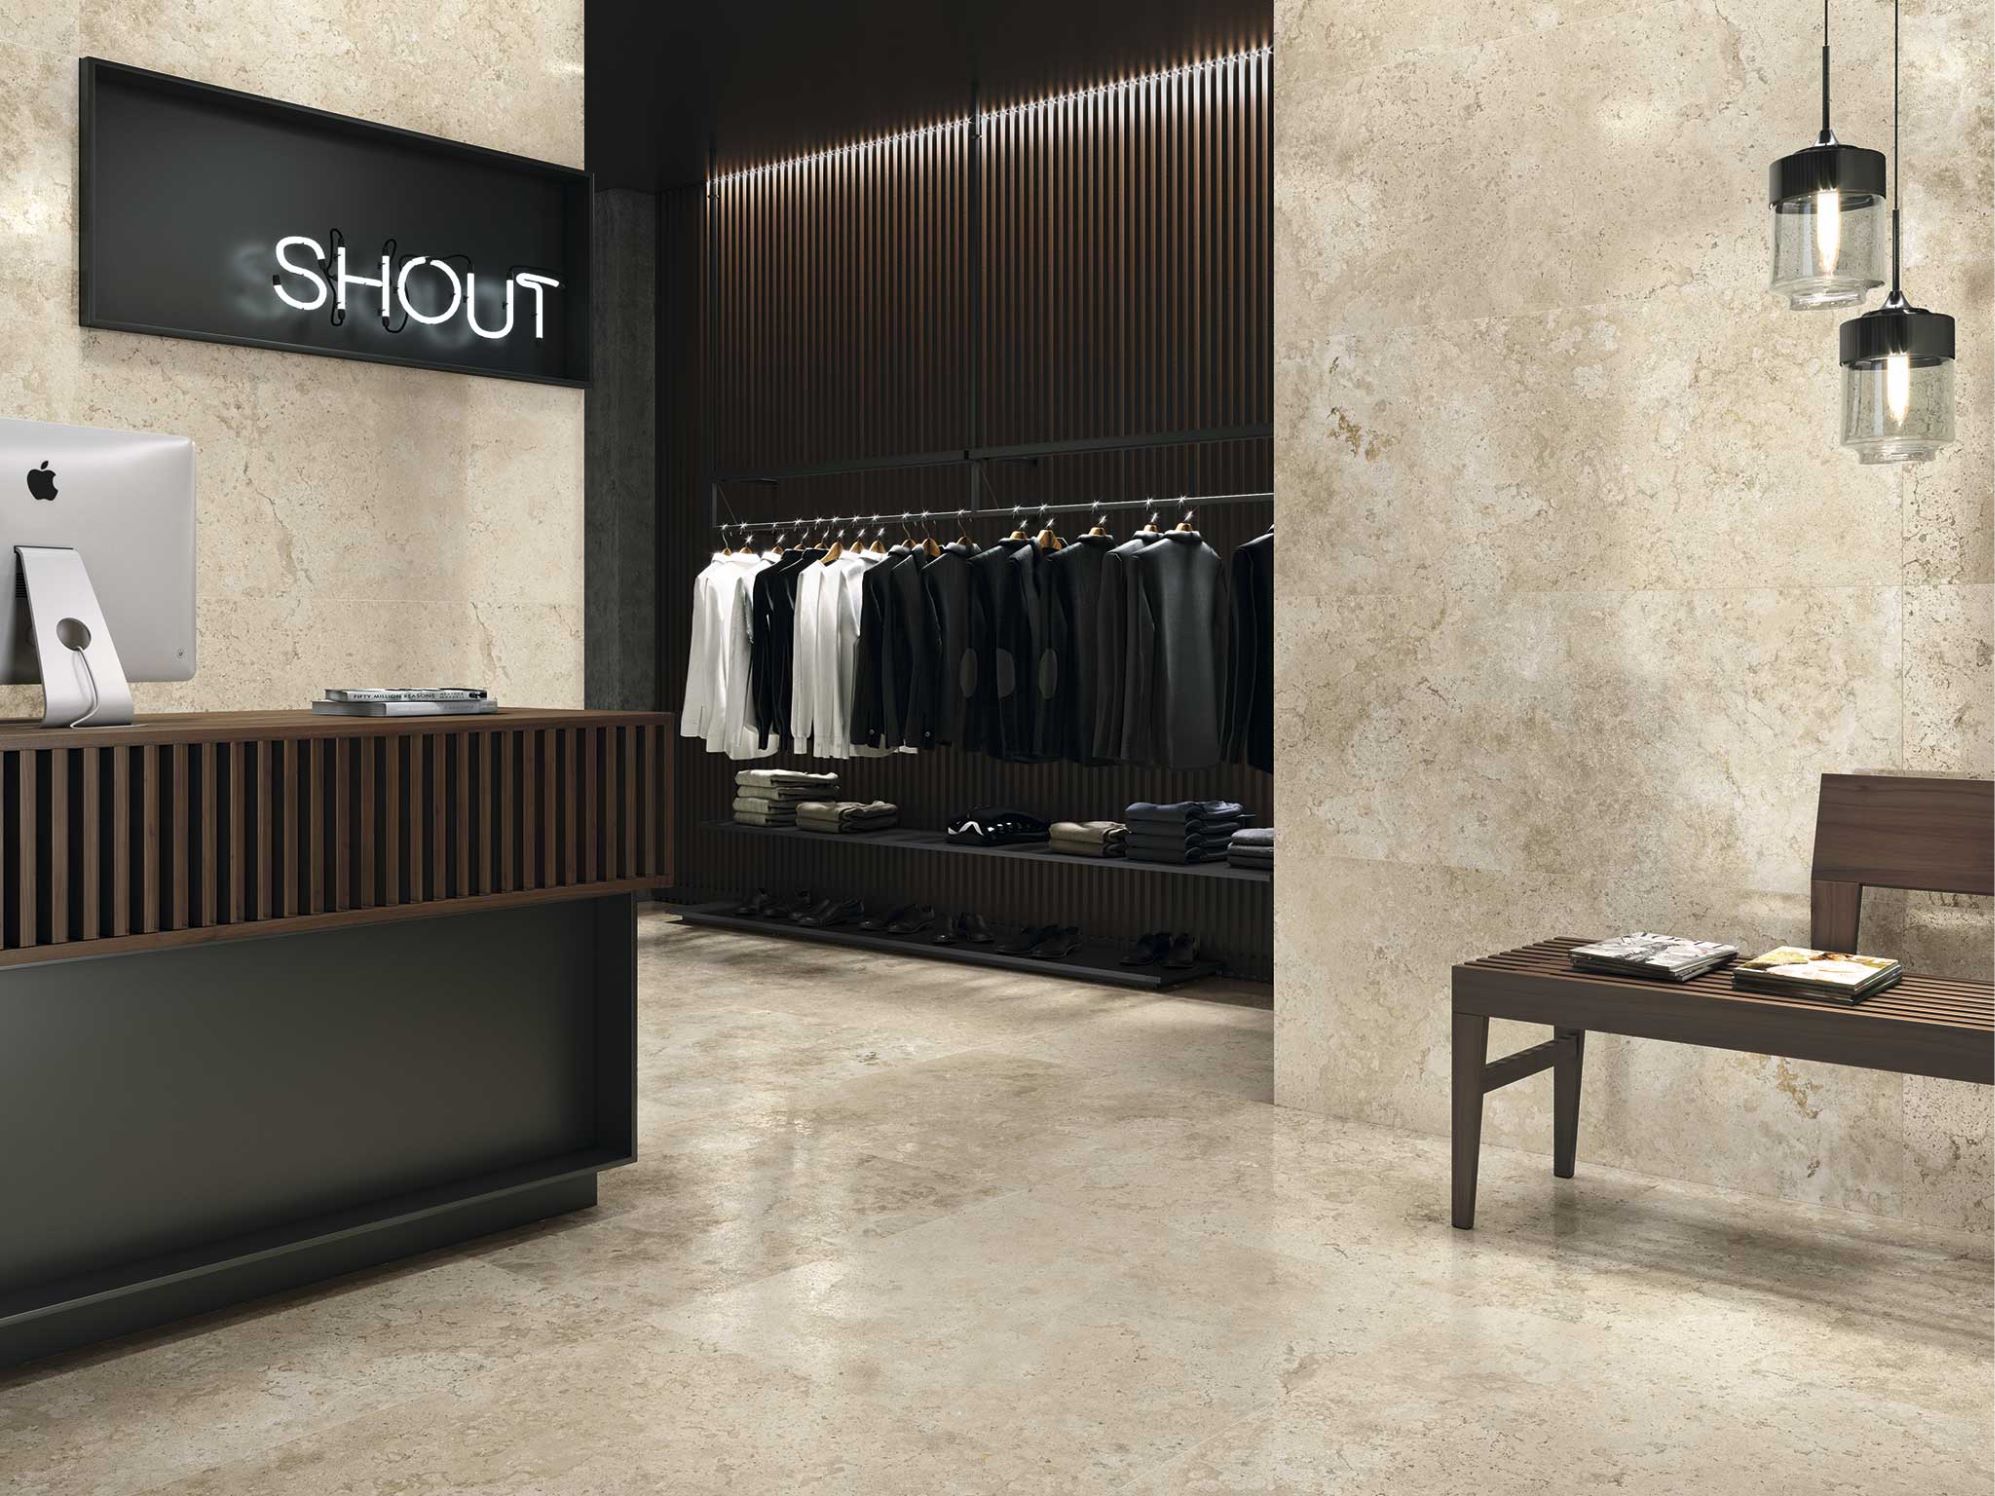 Baltimore Caramel | Stones & More | Finest selection of Mosaics, Glass, Tile and Stone